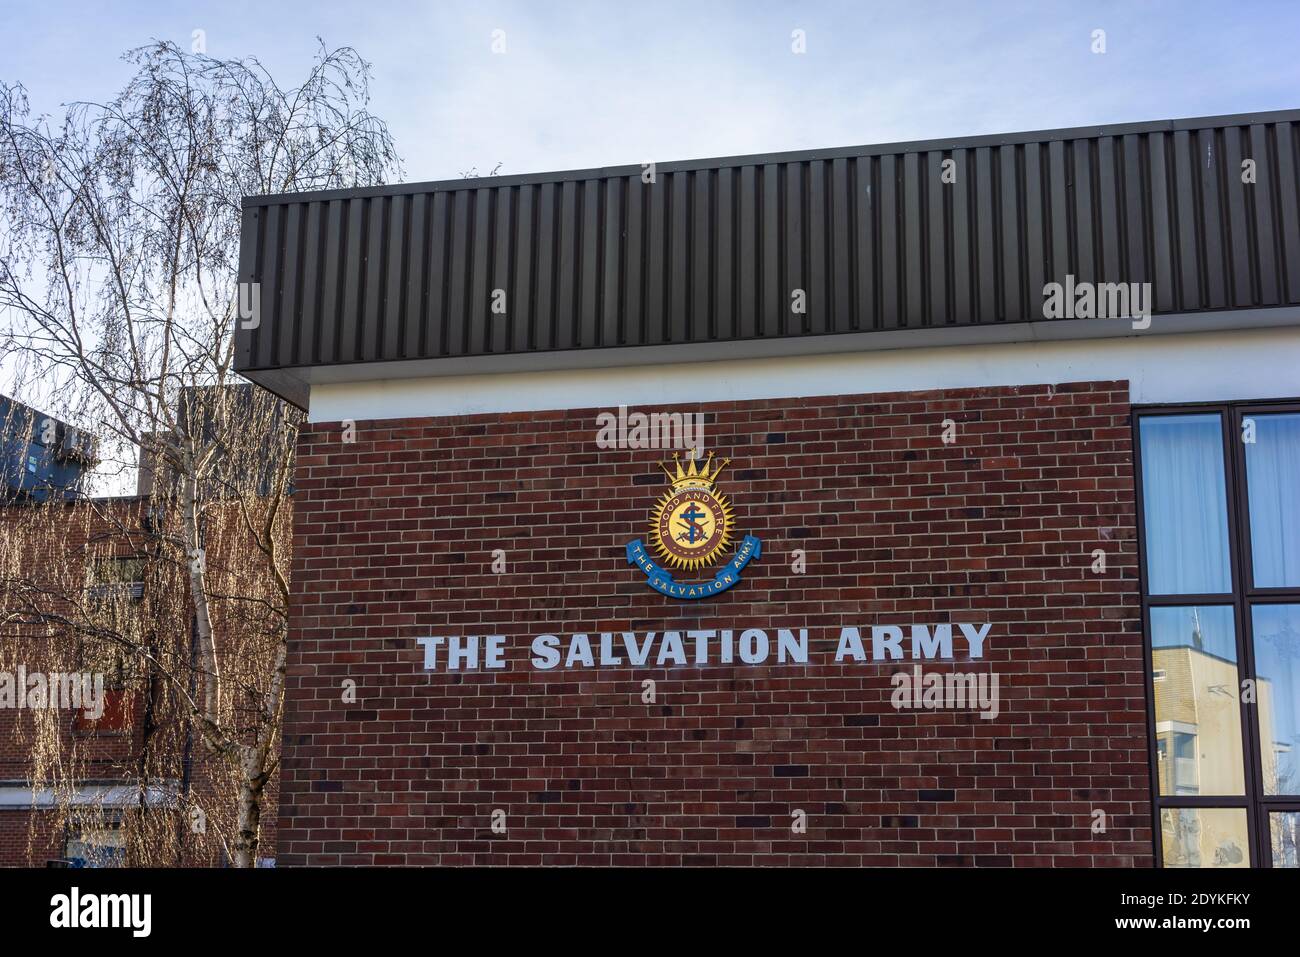 Facade of a Salvation Atmy branch in Southampton displaying the salvation army logo on the building, Southampton, Hampshire, England, UK Stock Photo